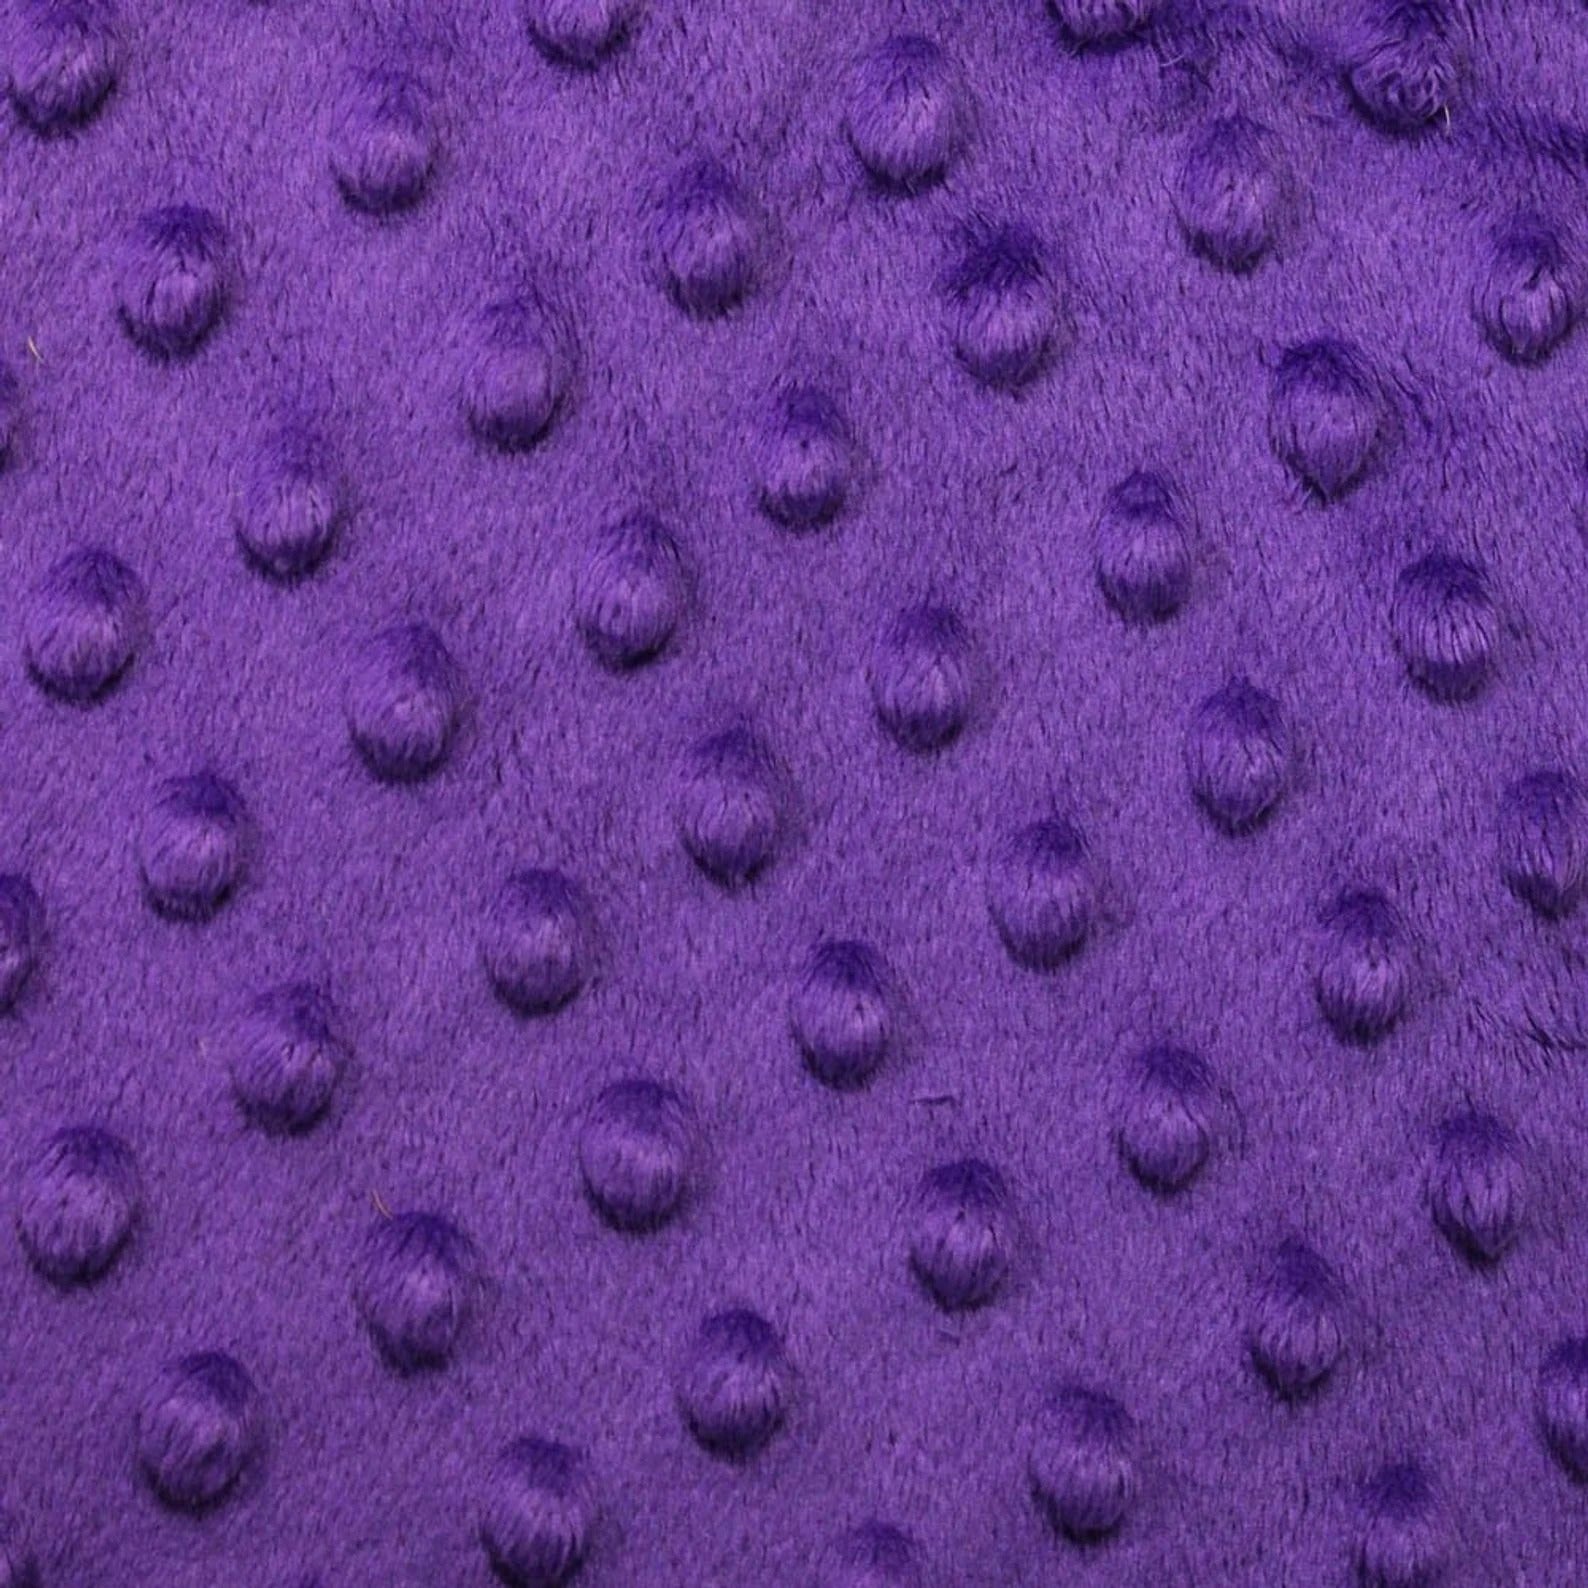 Dimple Dot Minky Fabric Sold By The Yard - 36"/ 58" Purple